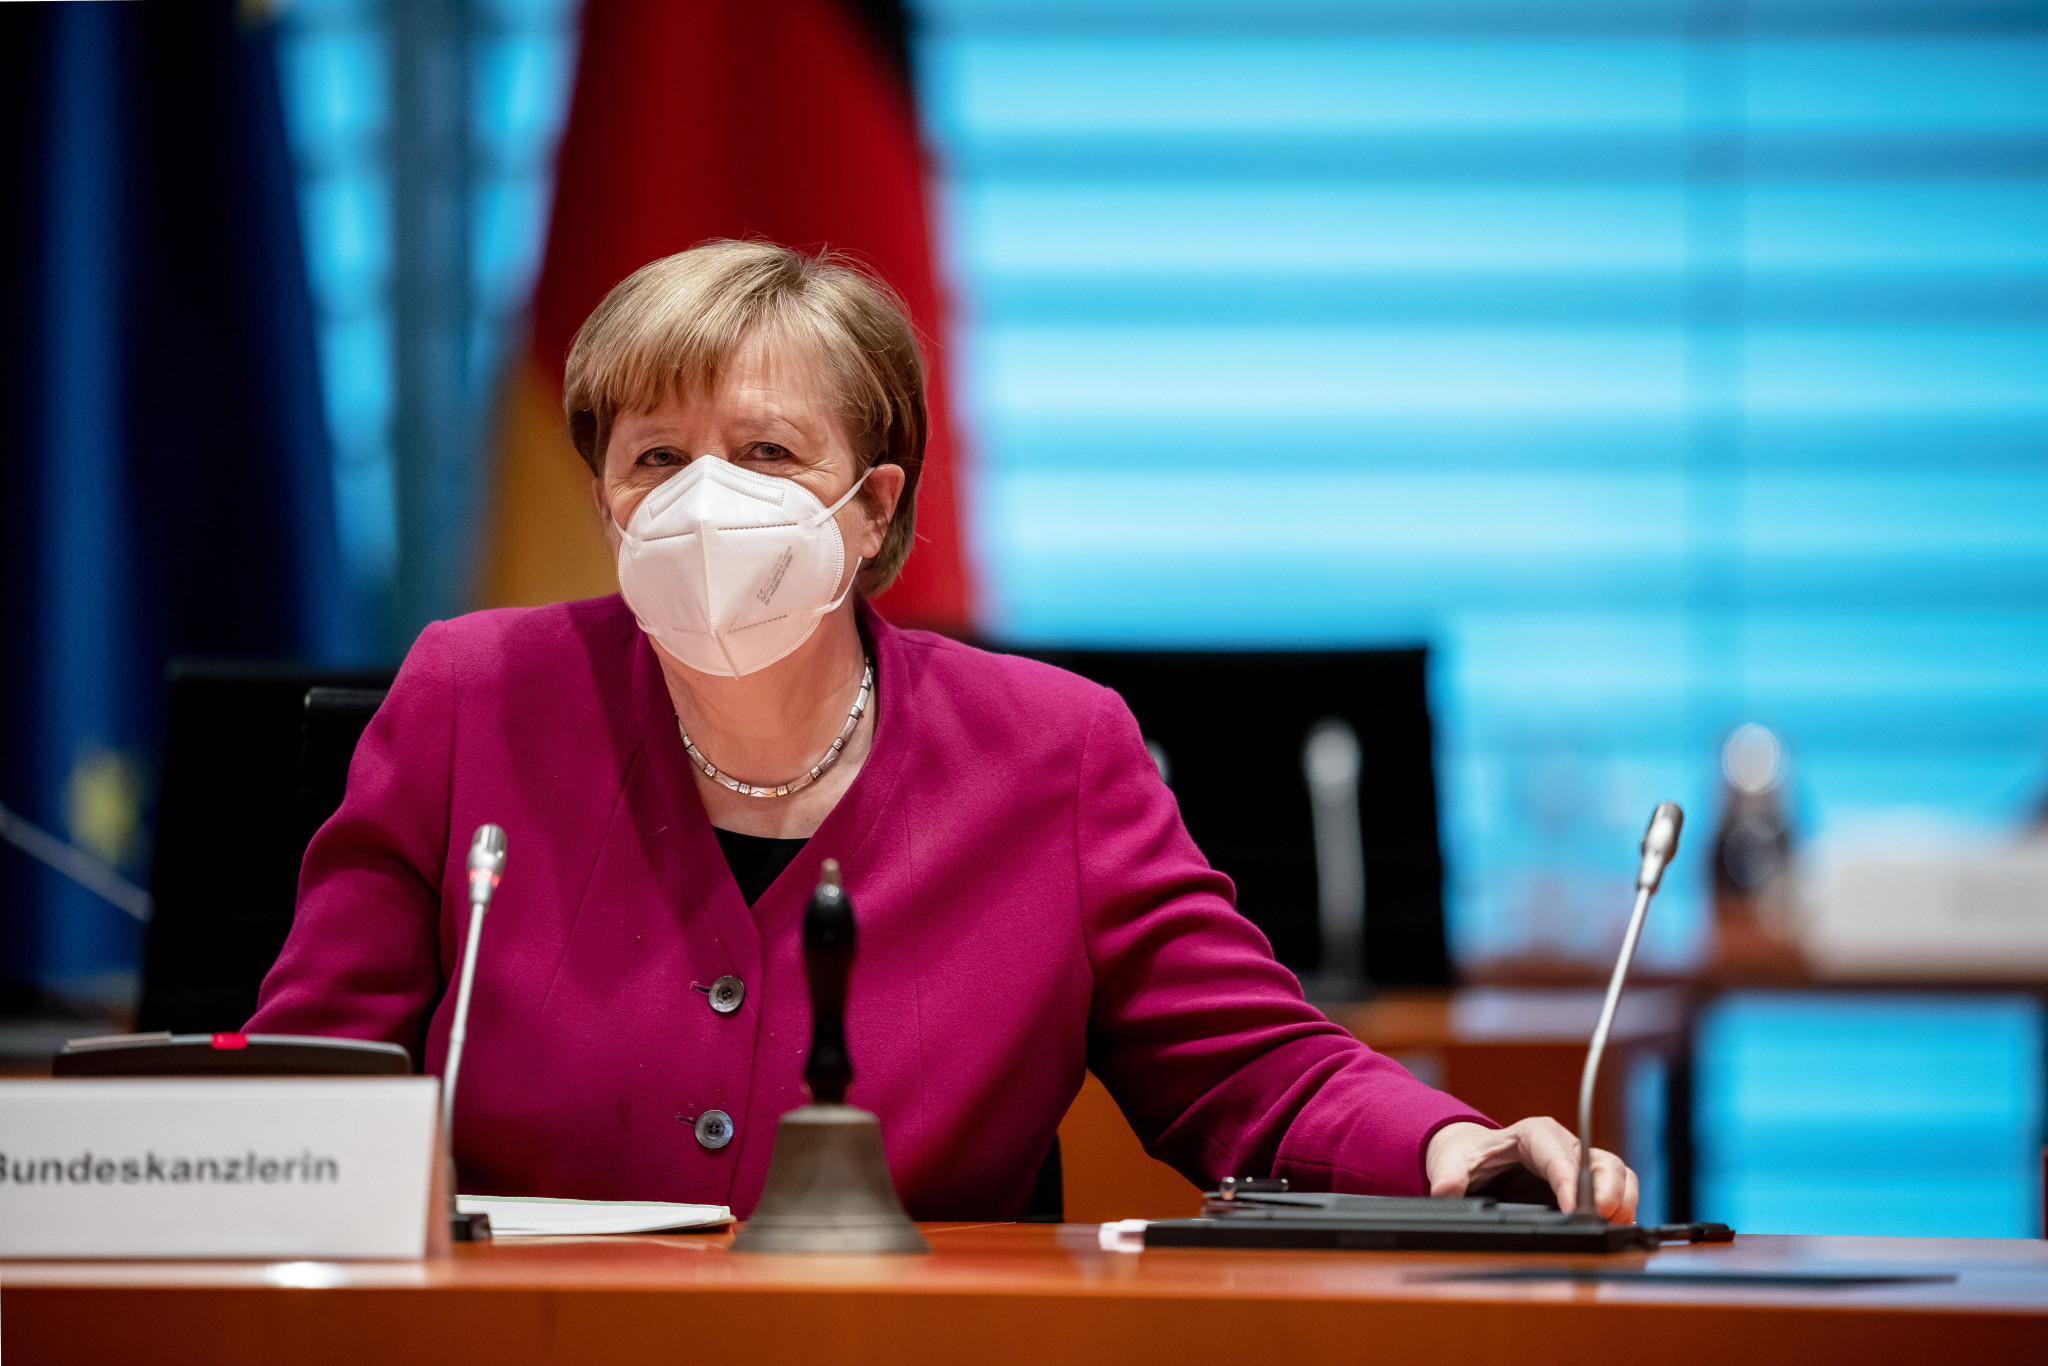 German Chancellor Angela Merkel has been urged by the DOSB to support sports clubs during the pandemic ©Getty Images